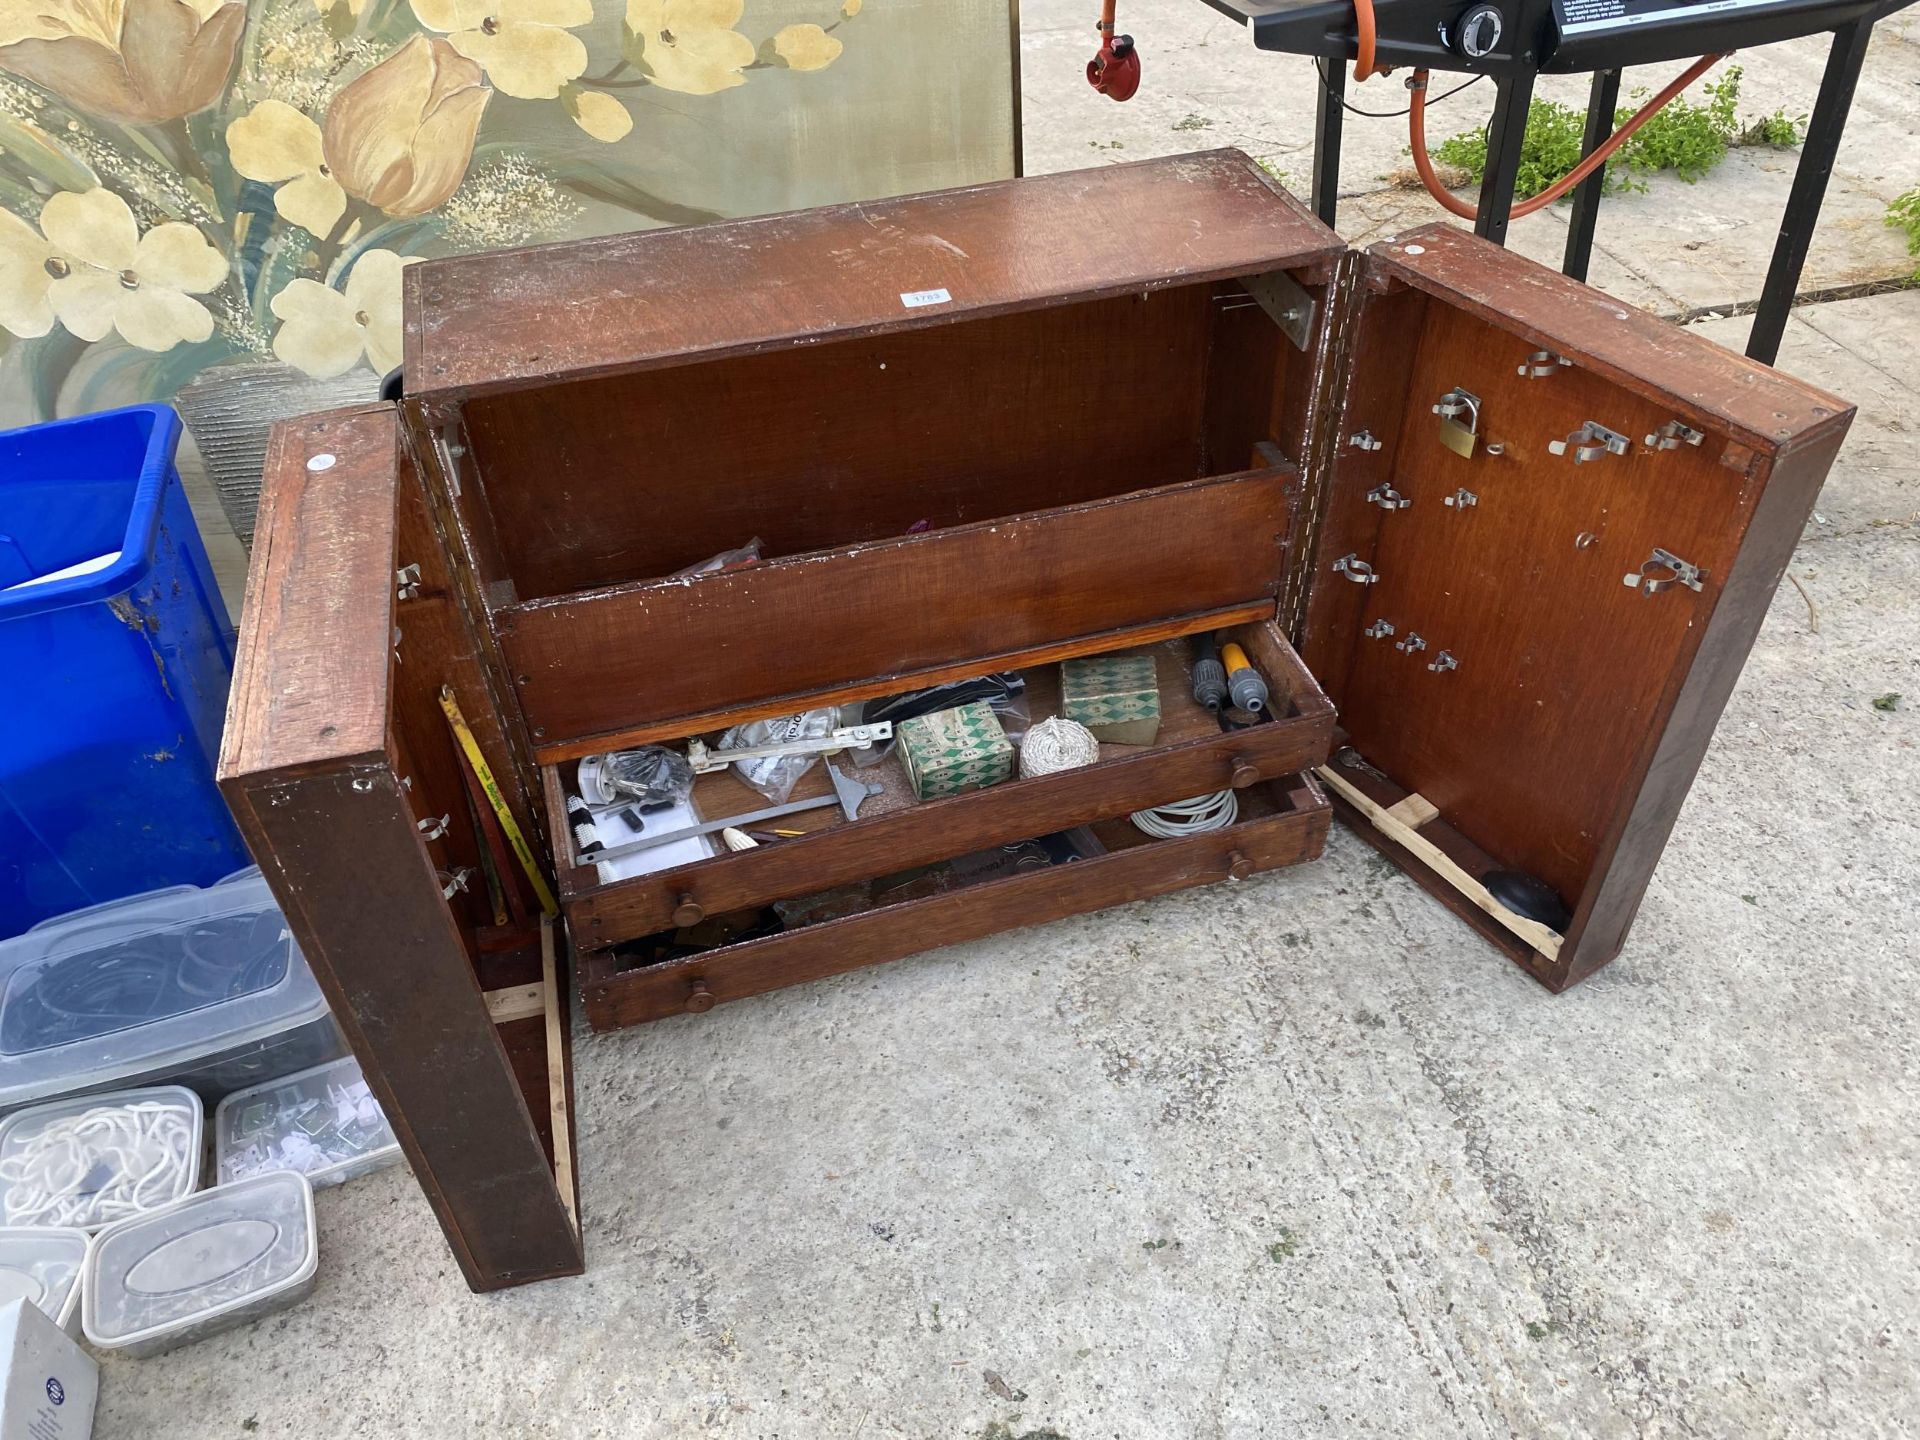 A LARGE VINTAGE WOODEN JOINERS CHEST WITH AN ASSORTMENT OF TOOLS